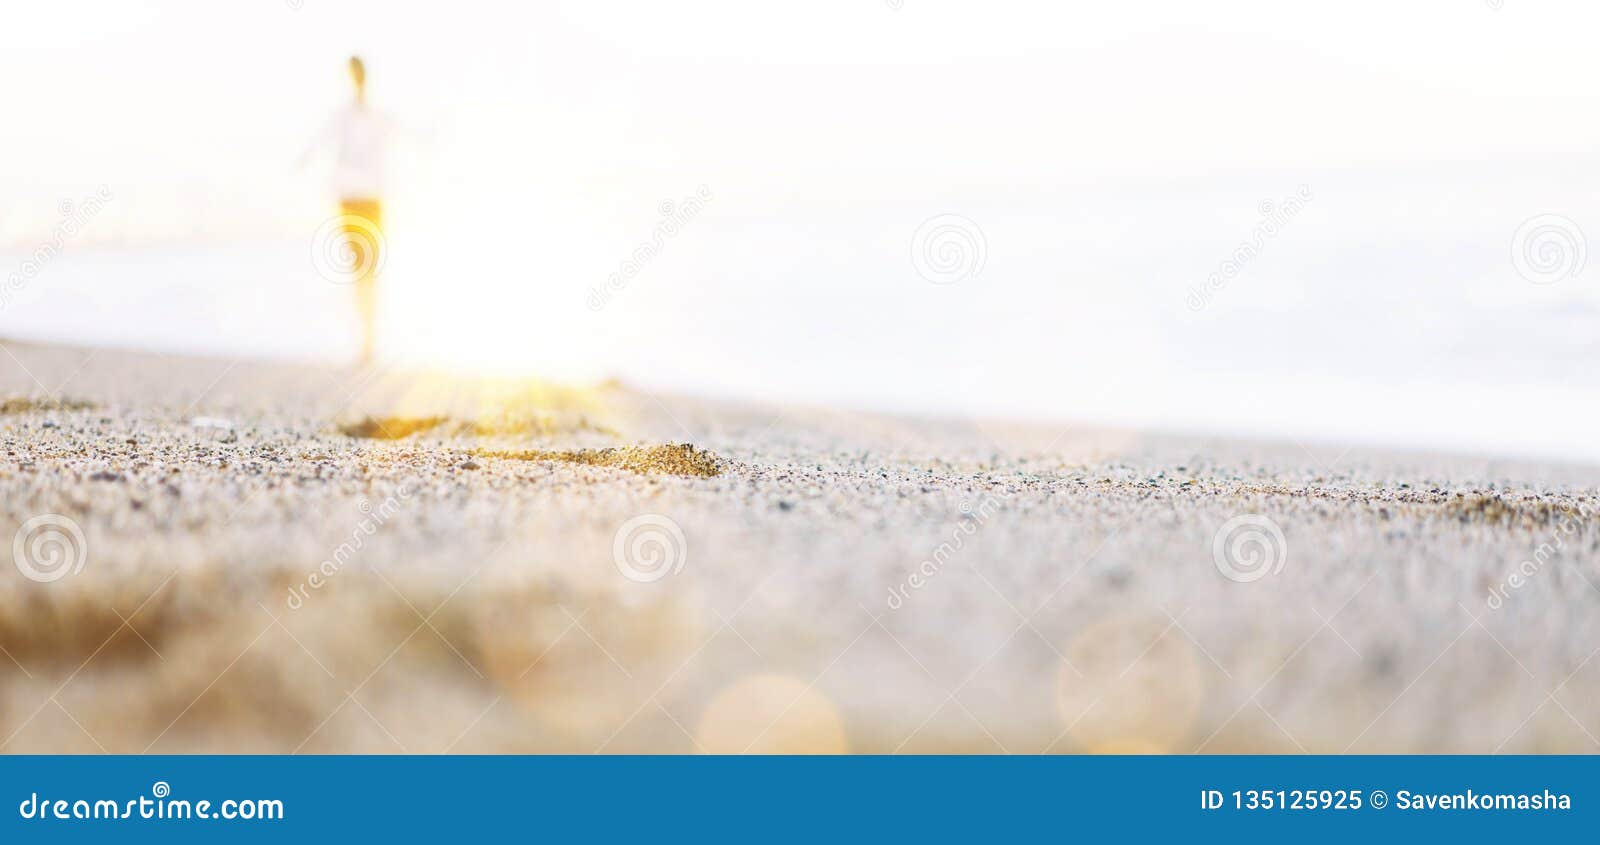 Silhouette of Man Strolling Coastline Beach on Sunny Day Background of ...